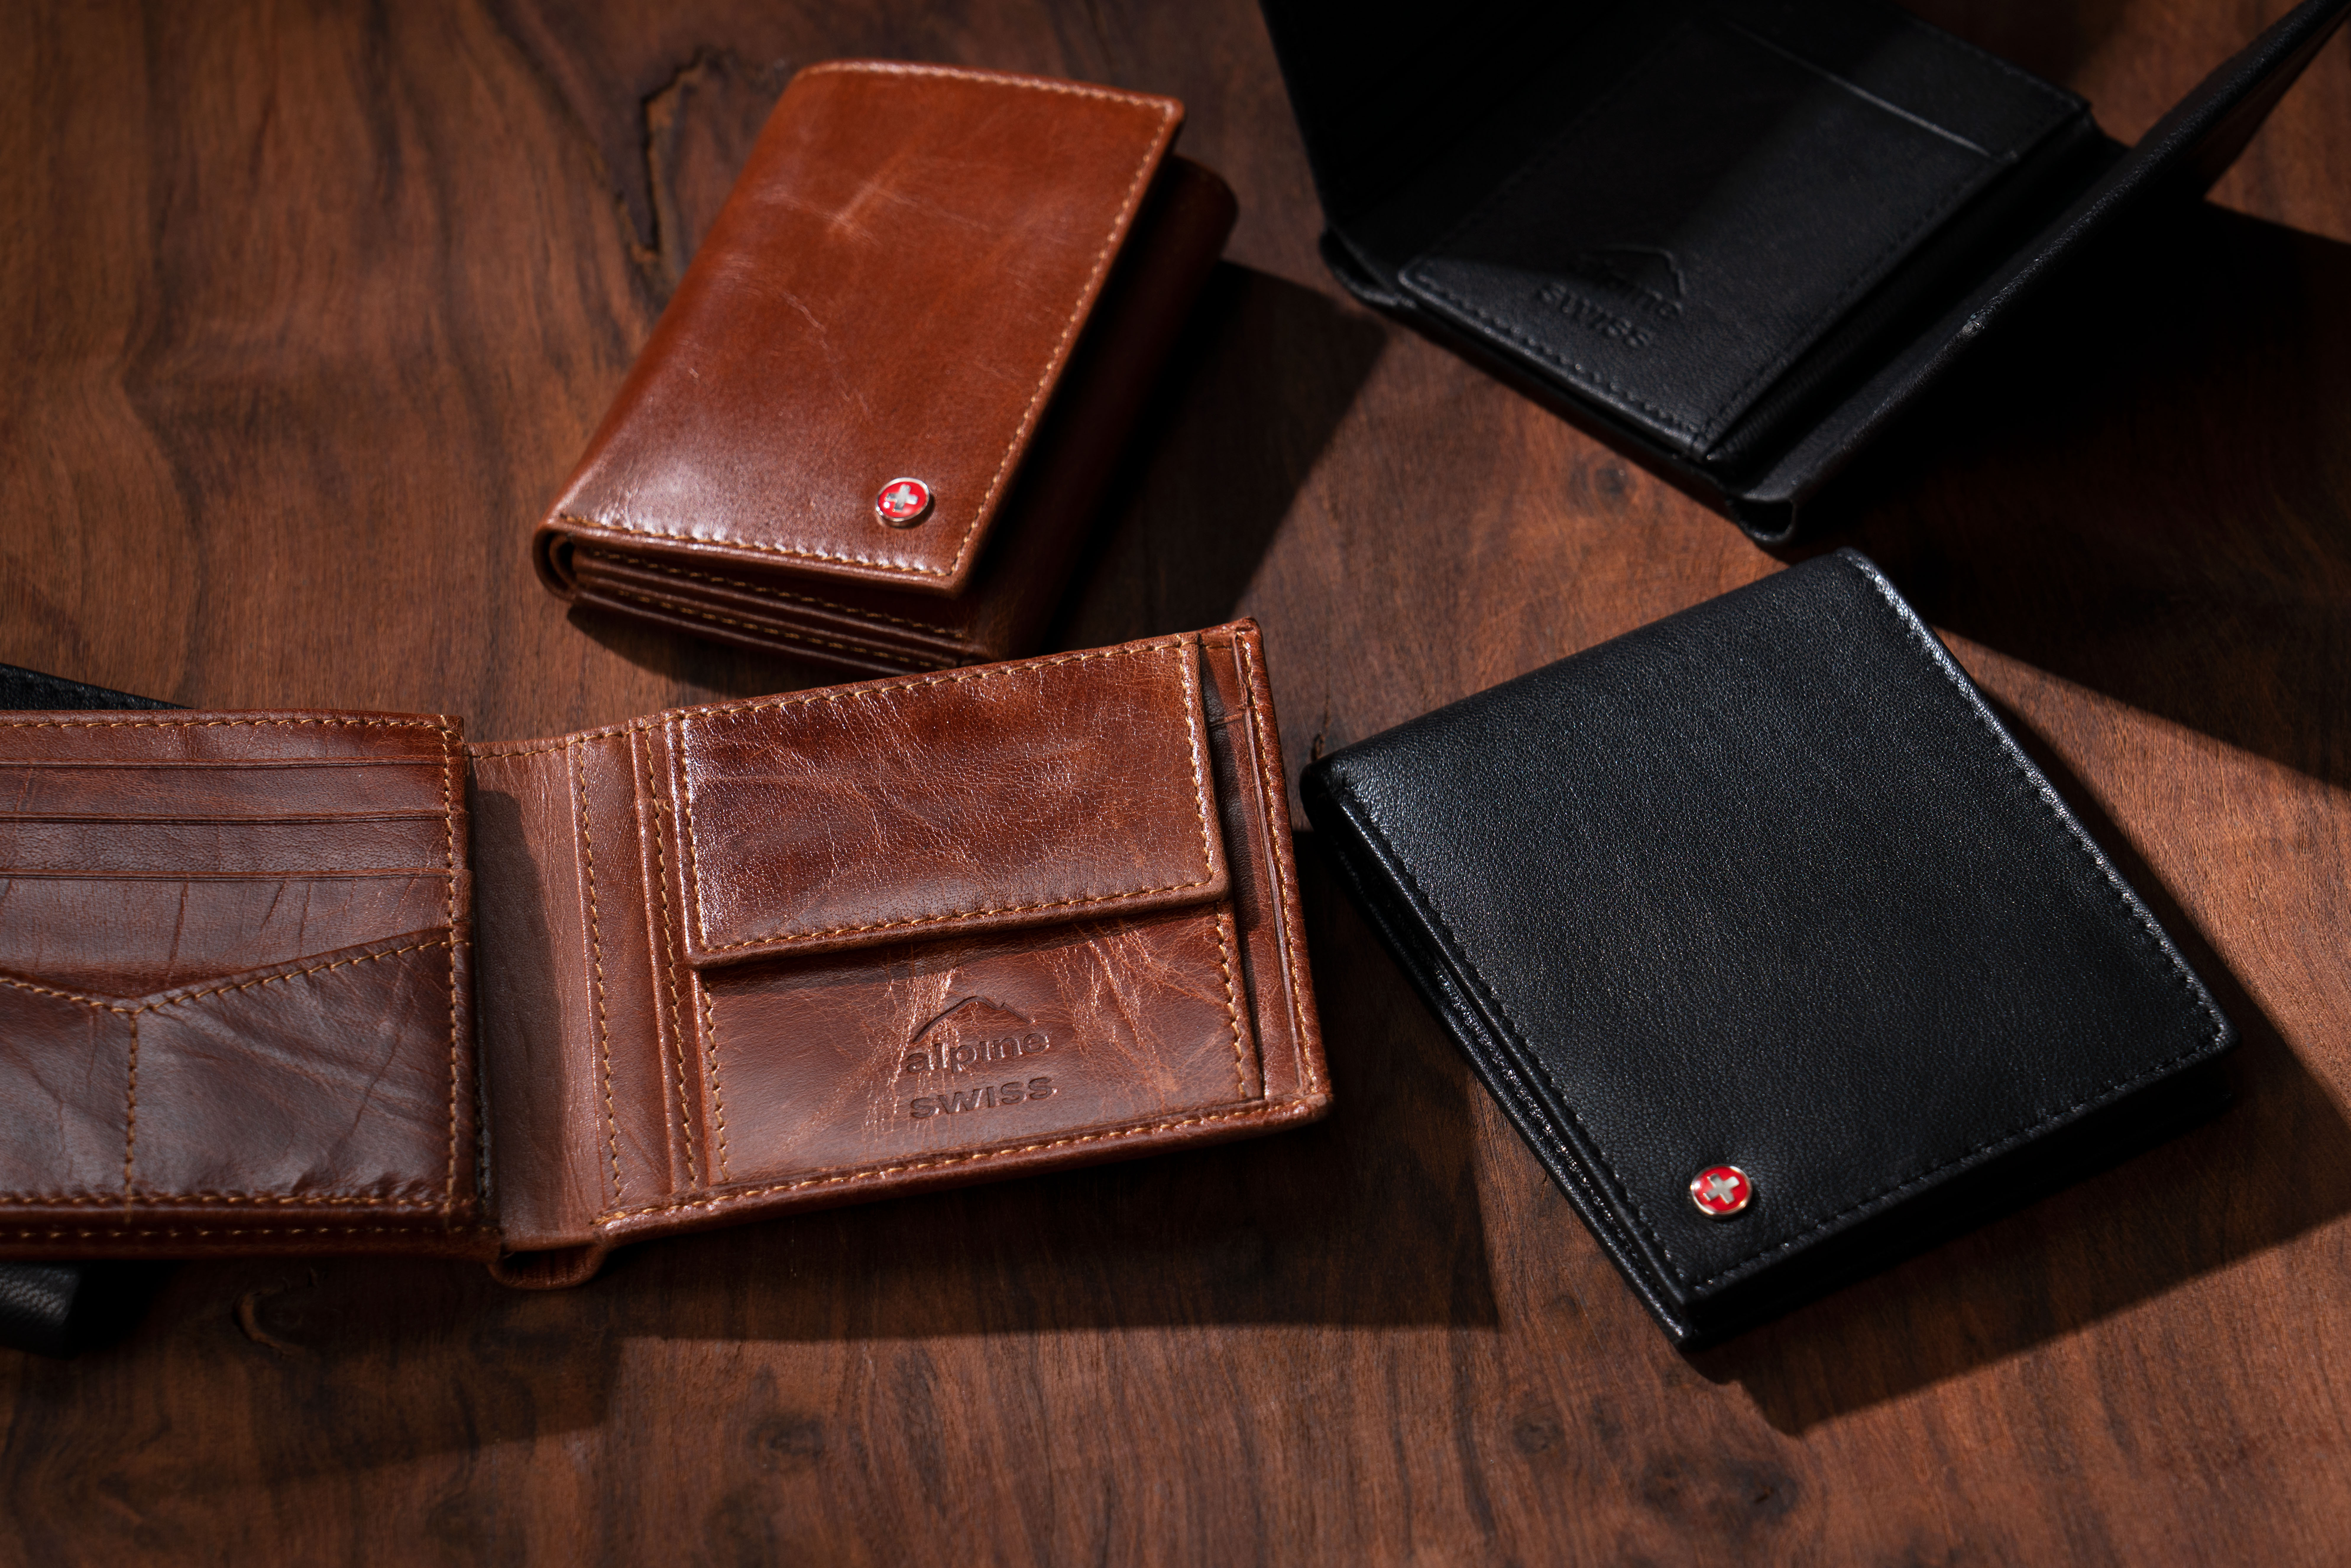 different types of wallets on the table